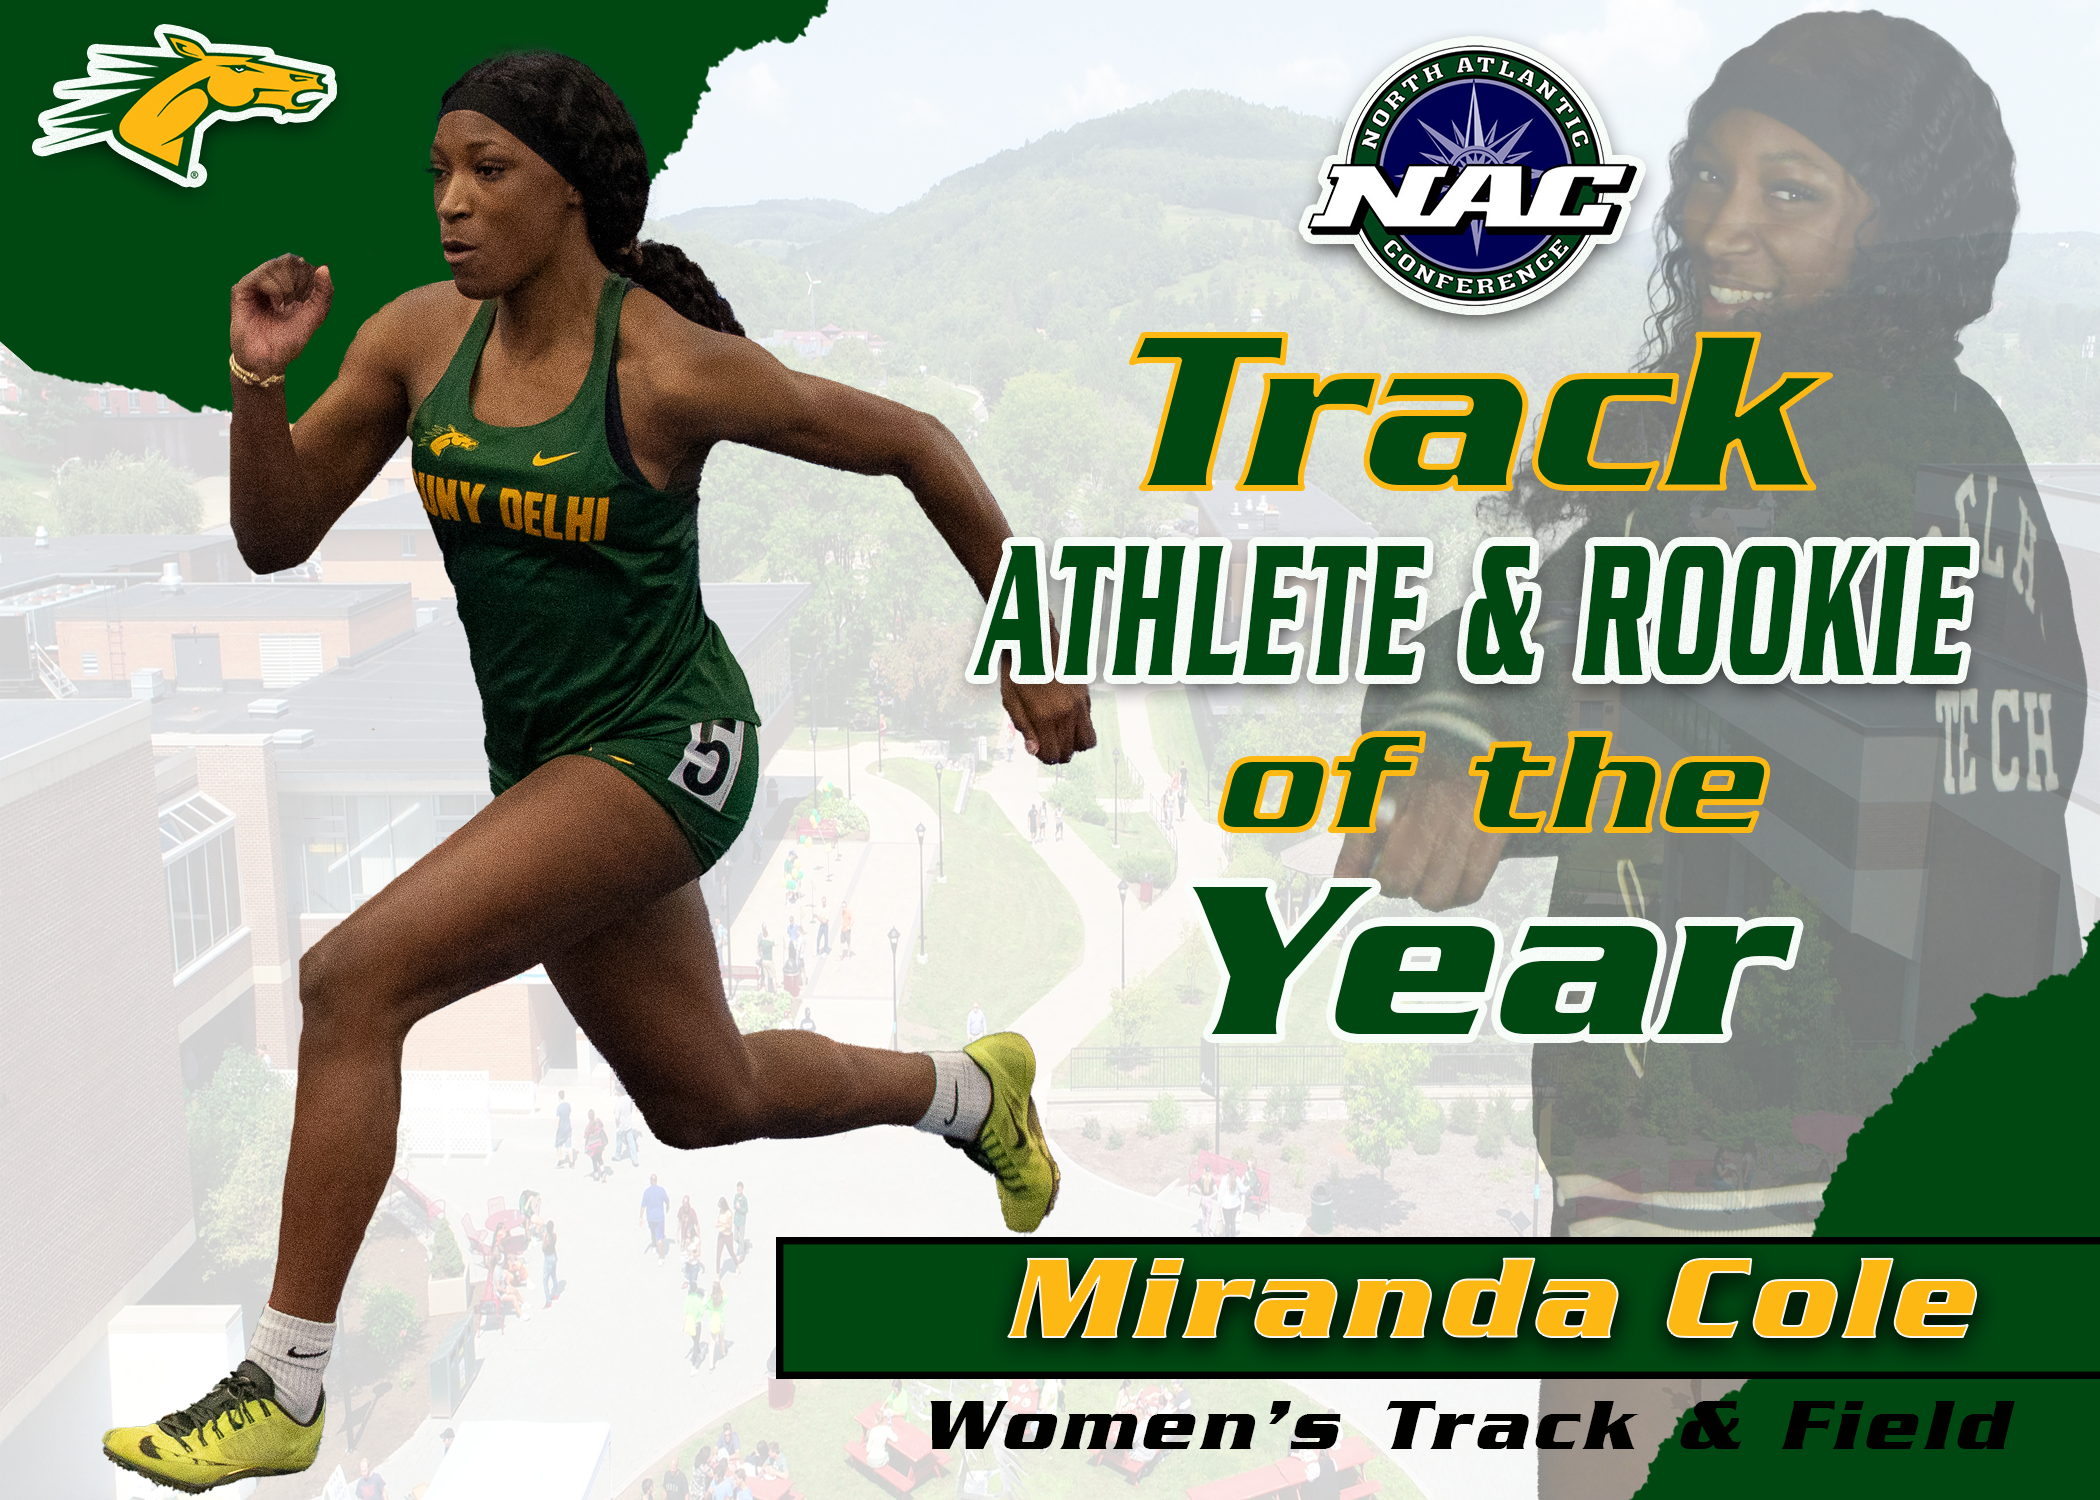 Miranda Cole wins North Atlantic Conference Track Athlete & Rookie of the Year